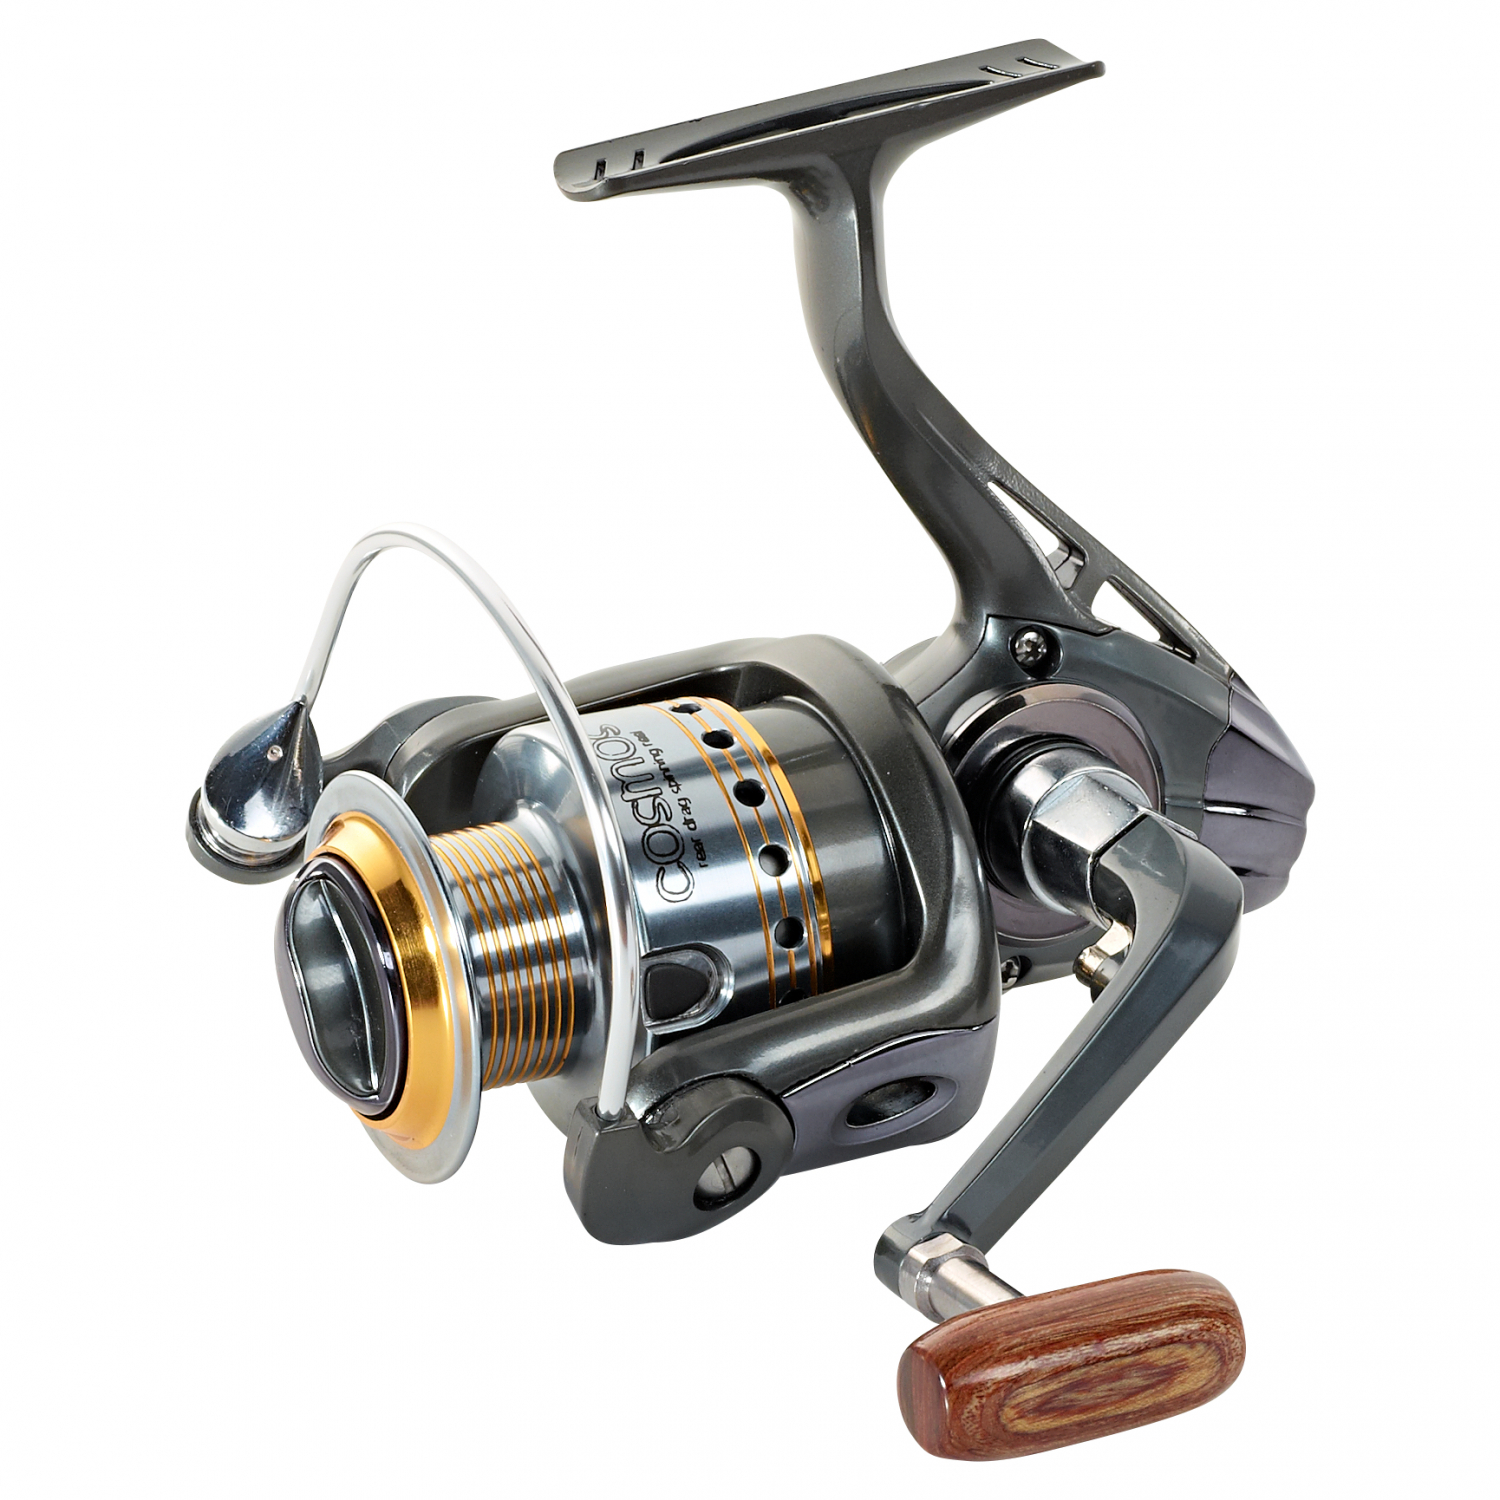 Riverman Fishing Reel Cosmos 3000 Front Drag at low prices